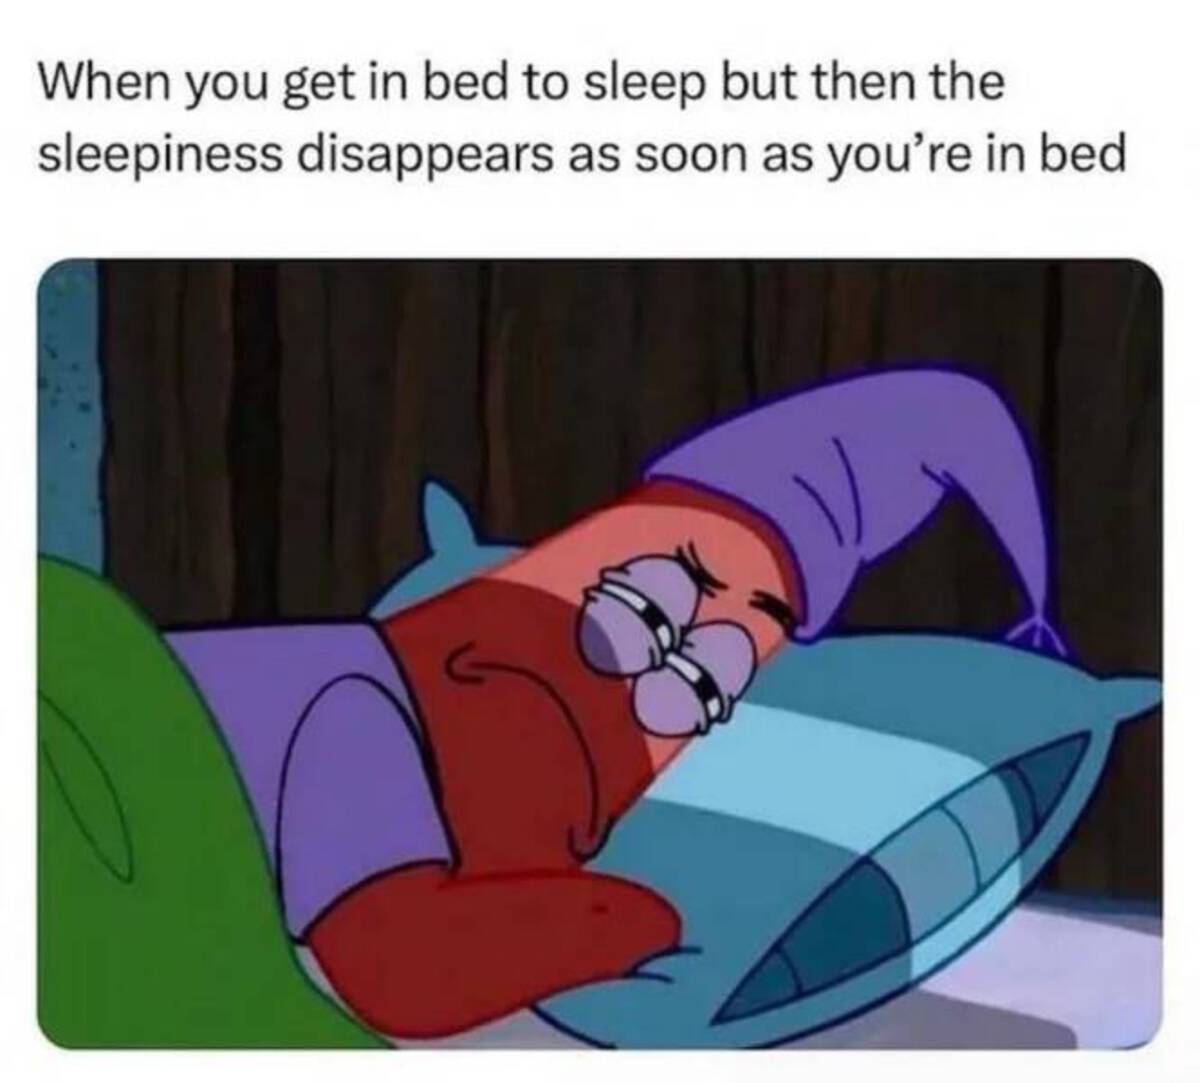 cartoon - When you get in bed to sleep but then the sleepiness disappears as soon as you're in bed